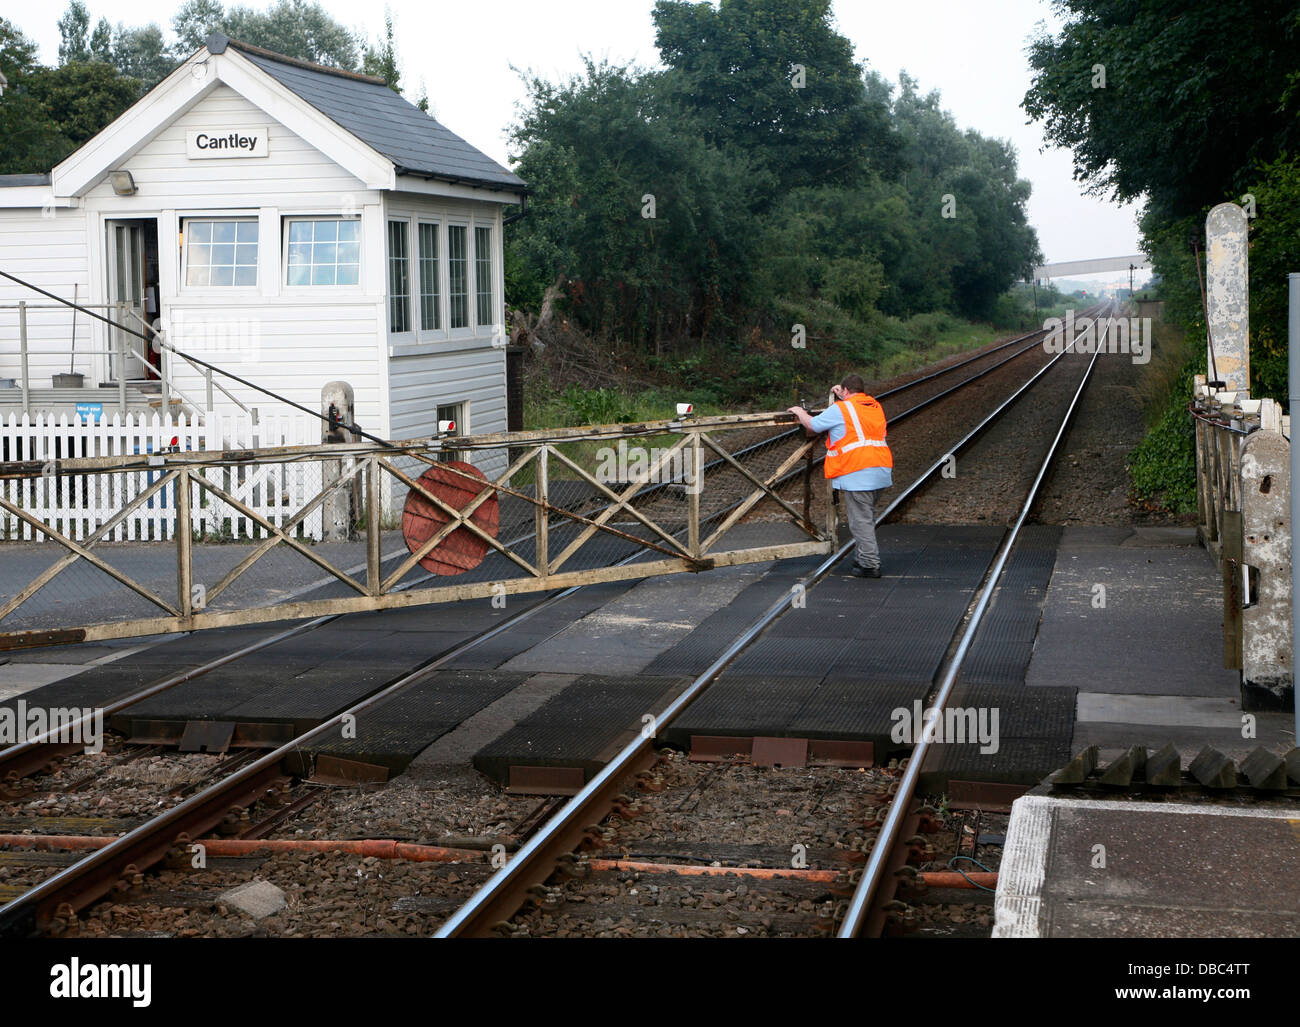 Manually operated railway level crossing at Cantley, Norfolk, England Stock Photo